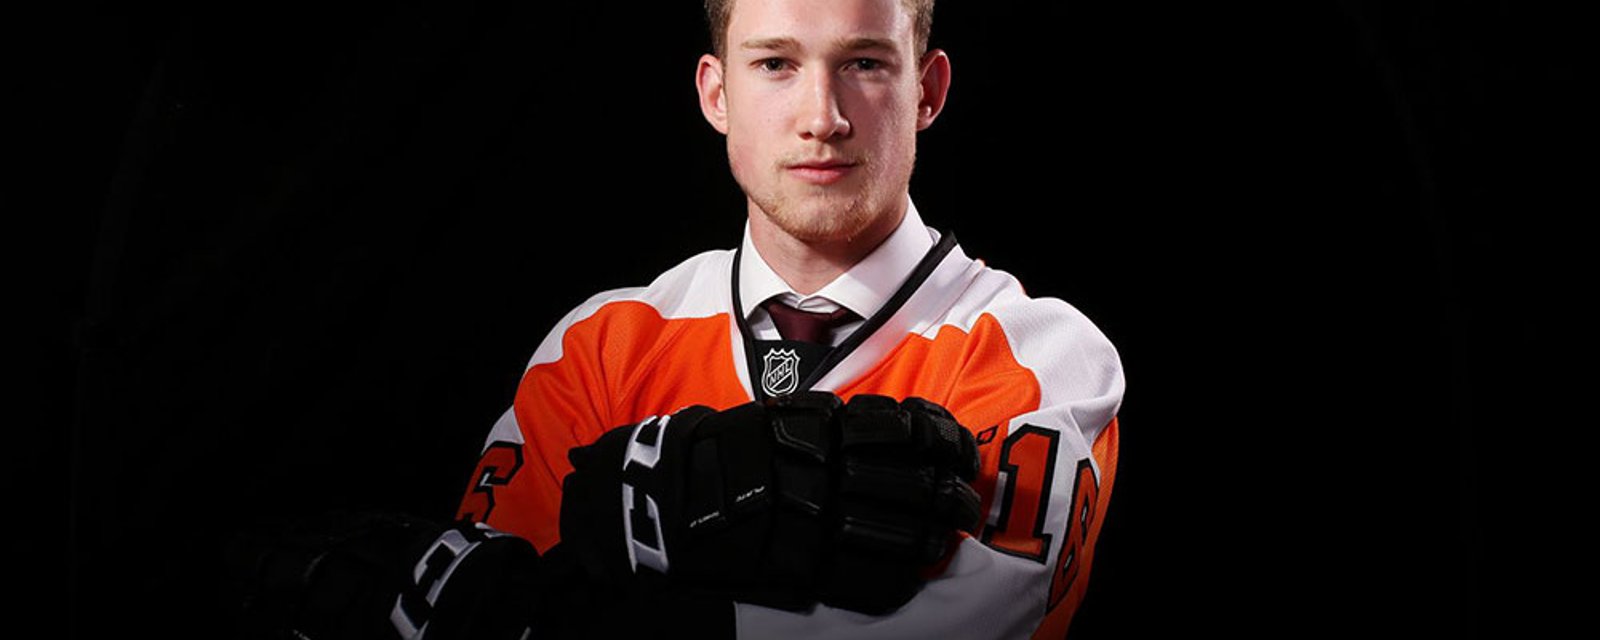 Flyers’ prospect opens about concussion issues